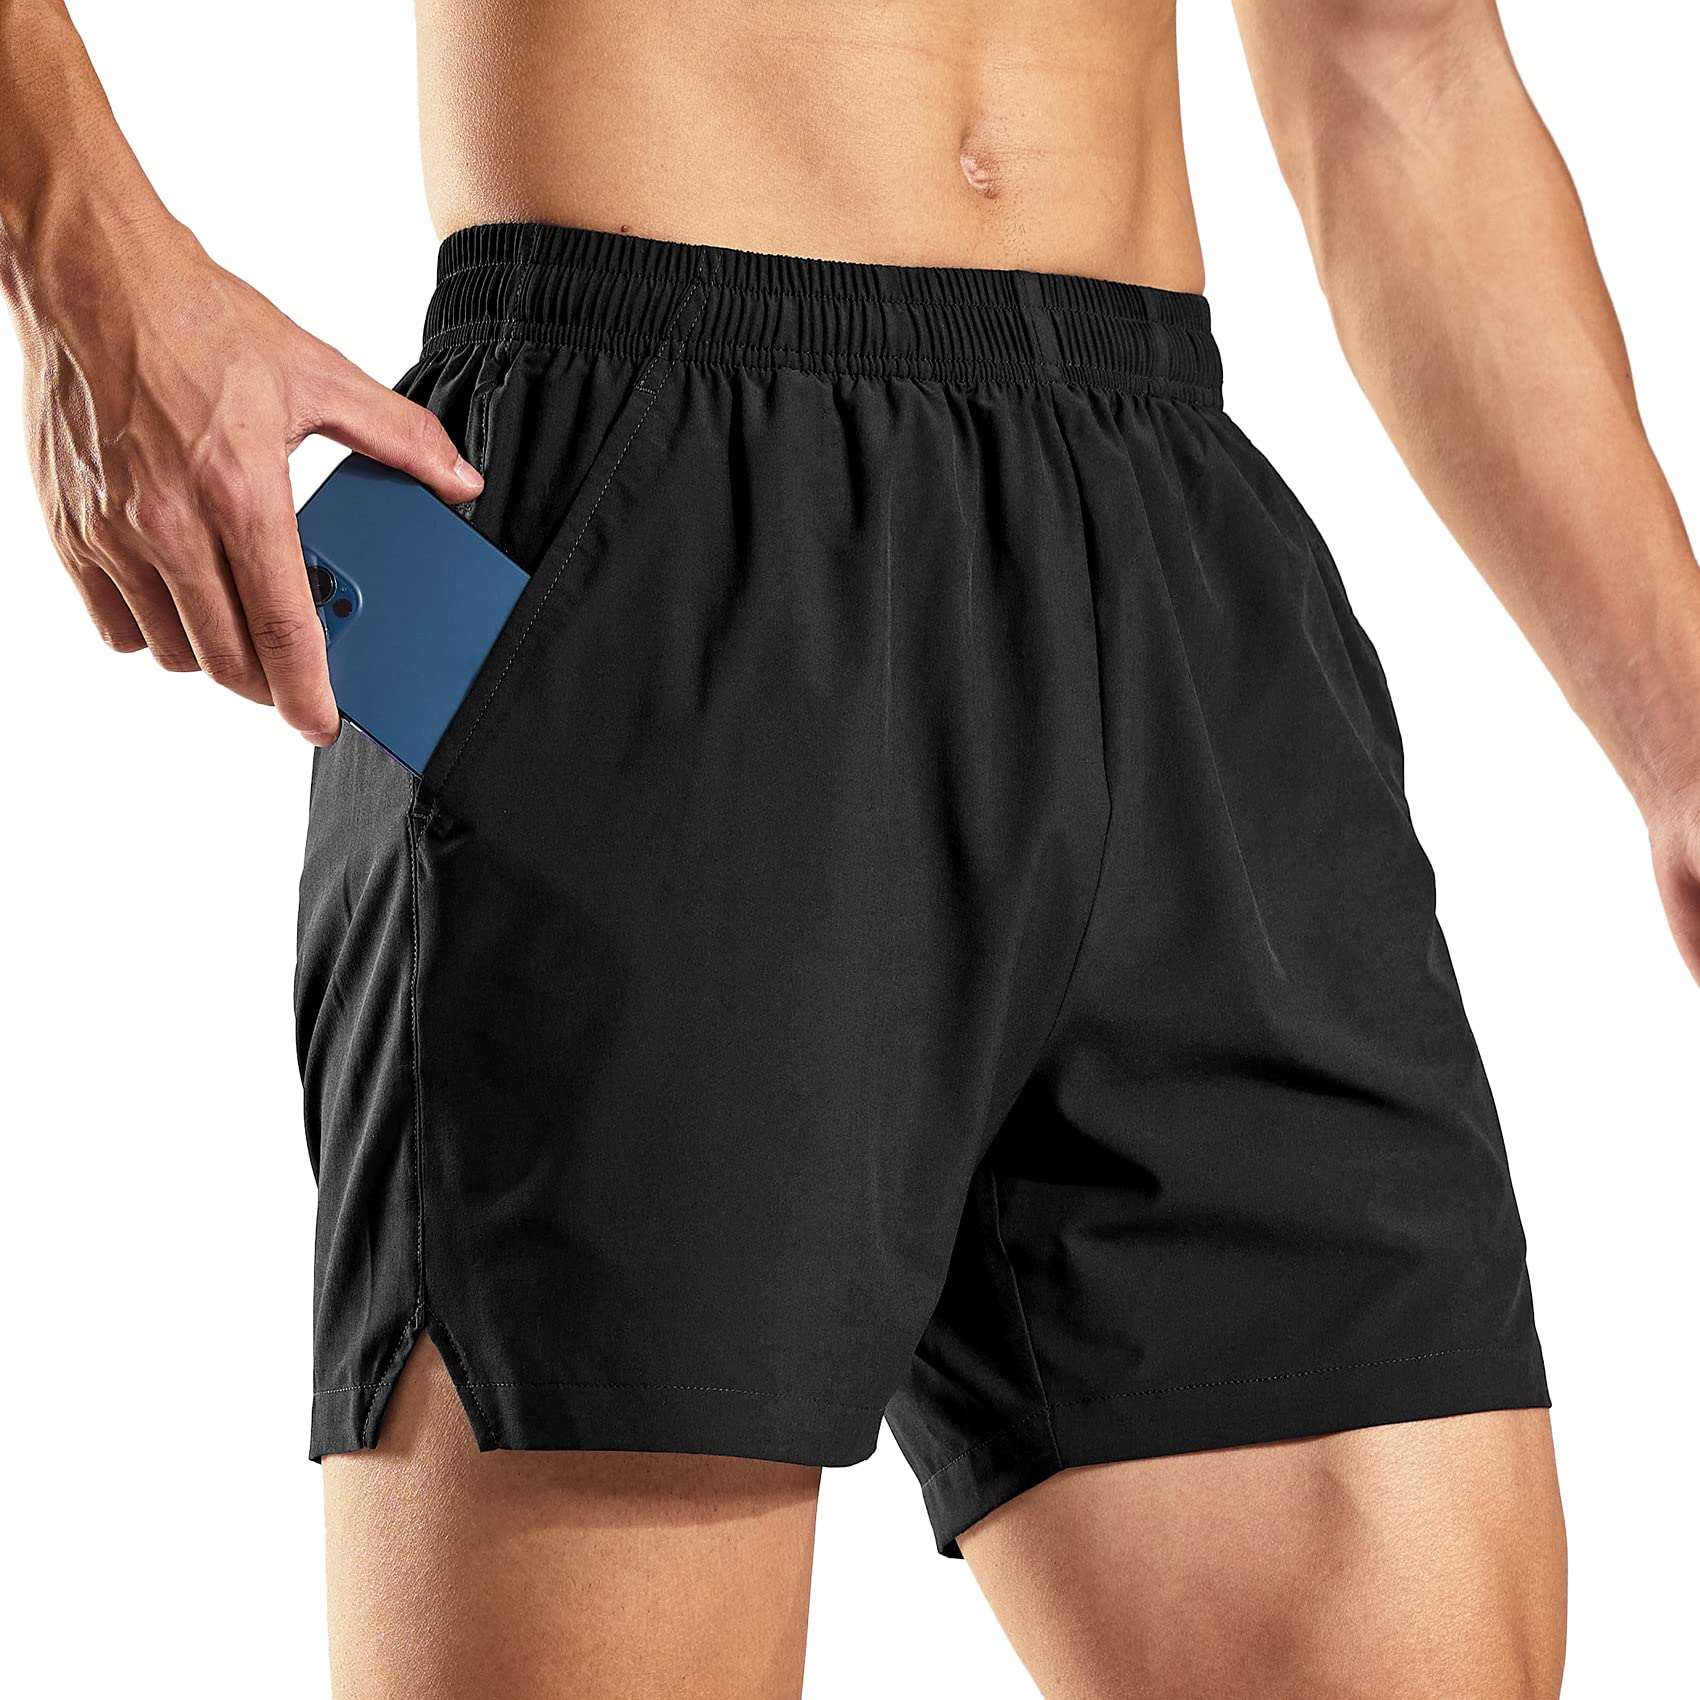 Men's Dry Fit Running Athletic Shorts with Pockets, 5 Inch - Black / S